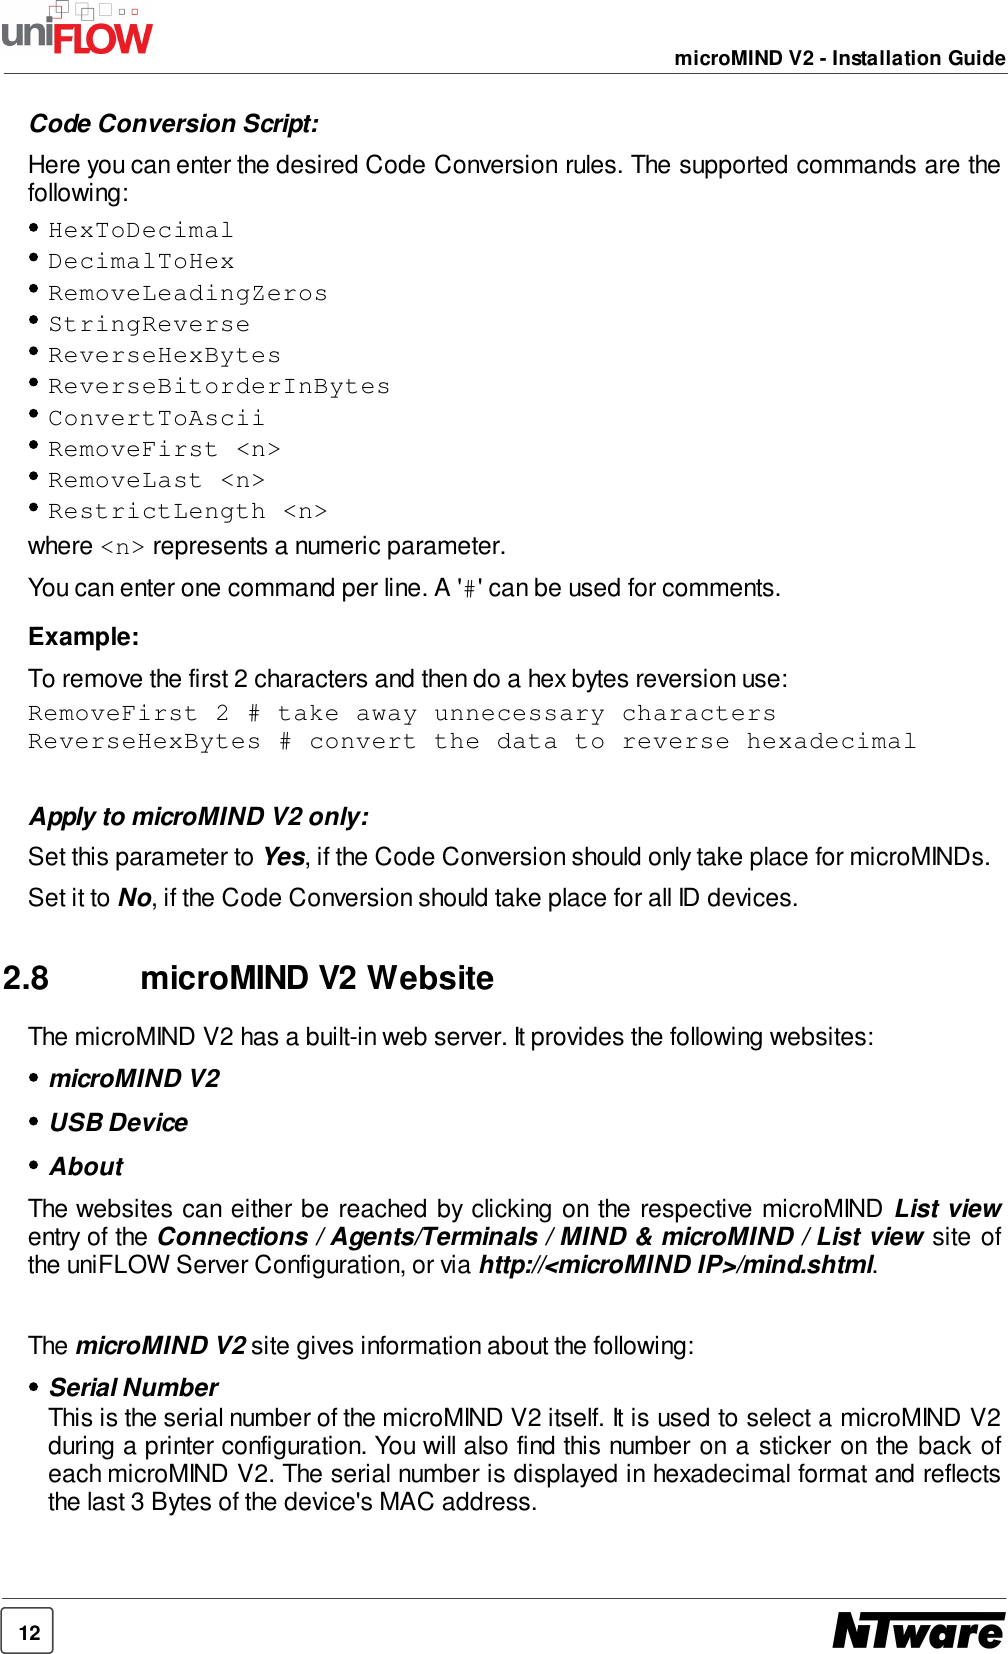 12microMIND V2 - Installation GuideCode Conversion Script:Here you can enter the desired Code Conversion rules. The supported commands are thefollowing:HexToDecimalDecimalToHexRemoveLeadingZerosStringReverseReverseHexBytesReverseBitorderInBytesConvertToAsciiRemoveFirst &lt;n&gt;RemoveLast &lt;n&gt;RestrictLength &lt;n&gt;where &lt;n&gt; represents a numeric parameter.You can enter one command per line. A &apos;#&apos; can be used for comments.Example:To remove the first 2 characters and then do a hex bytes reversion use:RemoveFirst 2 # take away unnecessary charactersReverseHexBytes # convert the data to reverse hexadecimalApply to microMIND V2 only:Set this parameter to Yes, if the Code Conversion should only take place for microMINDs.Set it to No, if the Code Conversion should take place for all ID devices.2.8 microMIND V2 WebsiteThe microMIND V2 has a built-in web server. It provides the following websites:microMIND V2USB DeviceAboutThe websites can either be reached by clicking on the respective microMIND List viewentry of the Connections / Agents/Terminals / MIND &amp; microMIND / List view site ofthe uniFLOW Server Configuration, or via http://&lt;microMIND IP&gt;/mind.shtml.The microMIND V2 site gives information about the following:Serial NumberThis is the serial number of the microMIND V2 itself. It is used to select a microMIND V2during a printer configuration. You will also find this number on a sticker on the back ofeach microMIND V2. The serial number is displayed in hexadecimal format and reflectsthe last 3 Bytes of the device&apos;s MAC address.